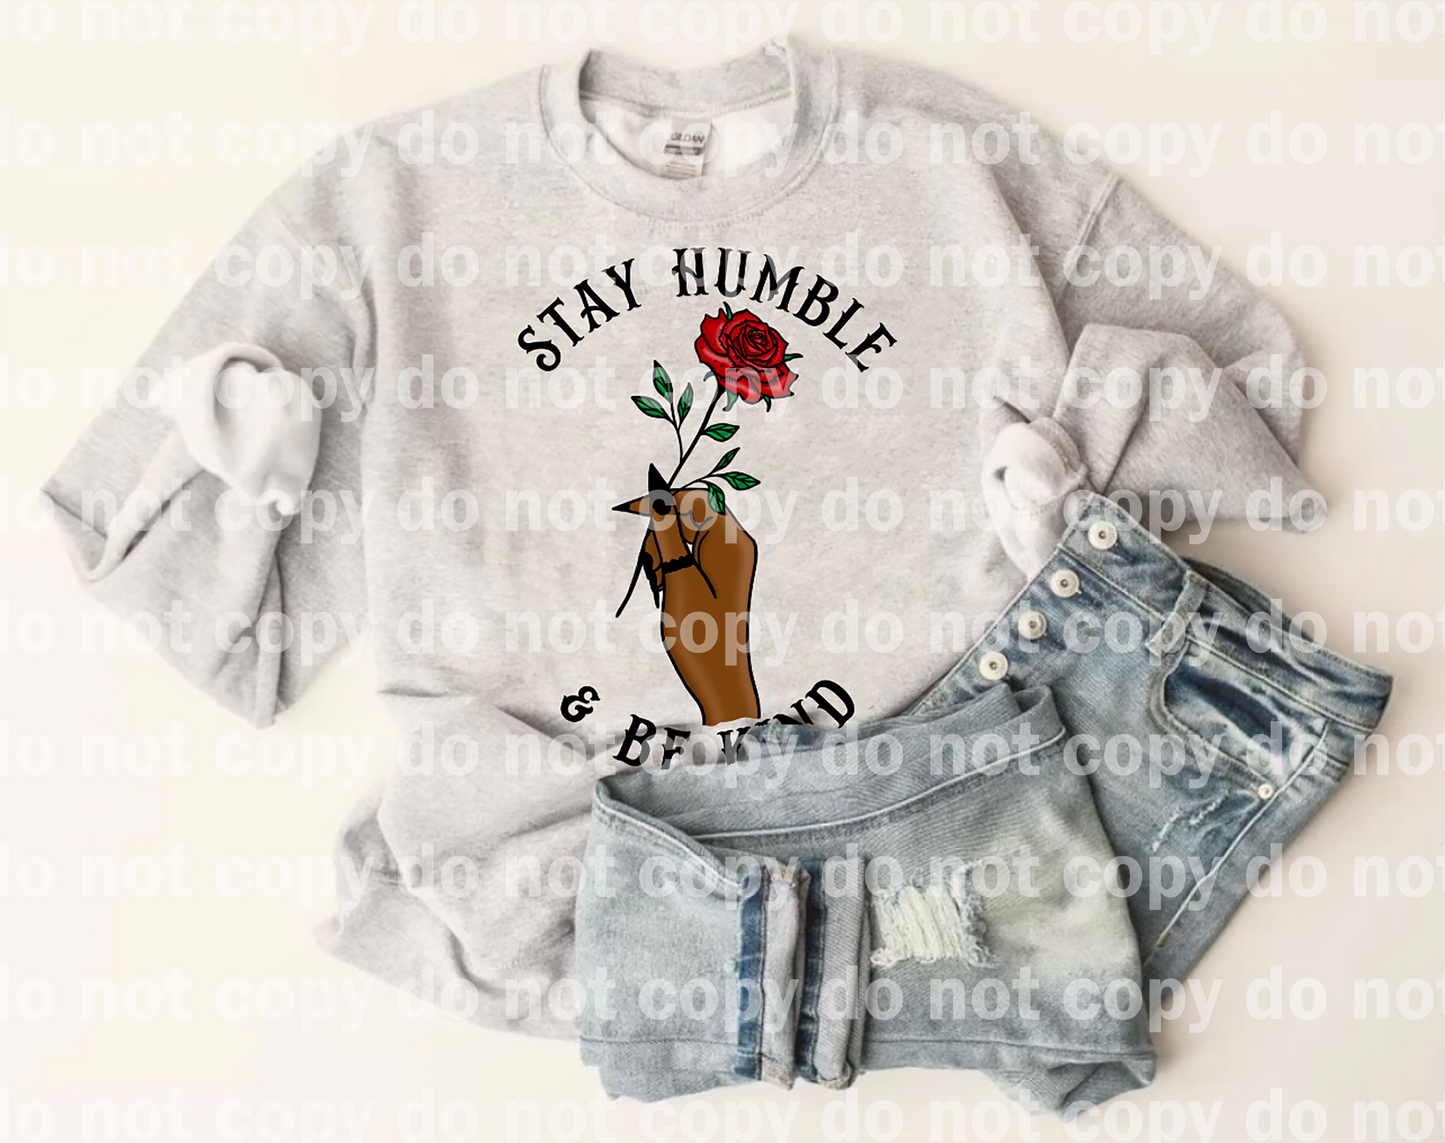 Stay Humble And Be Kind Dark Hand Dream Print or Sublimation Print